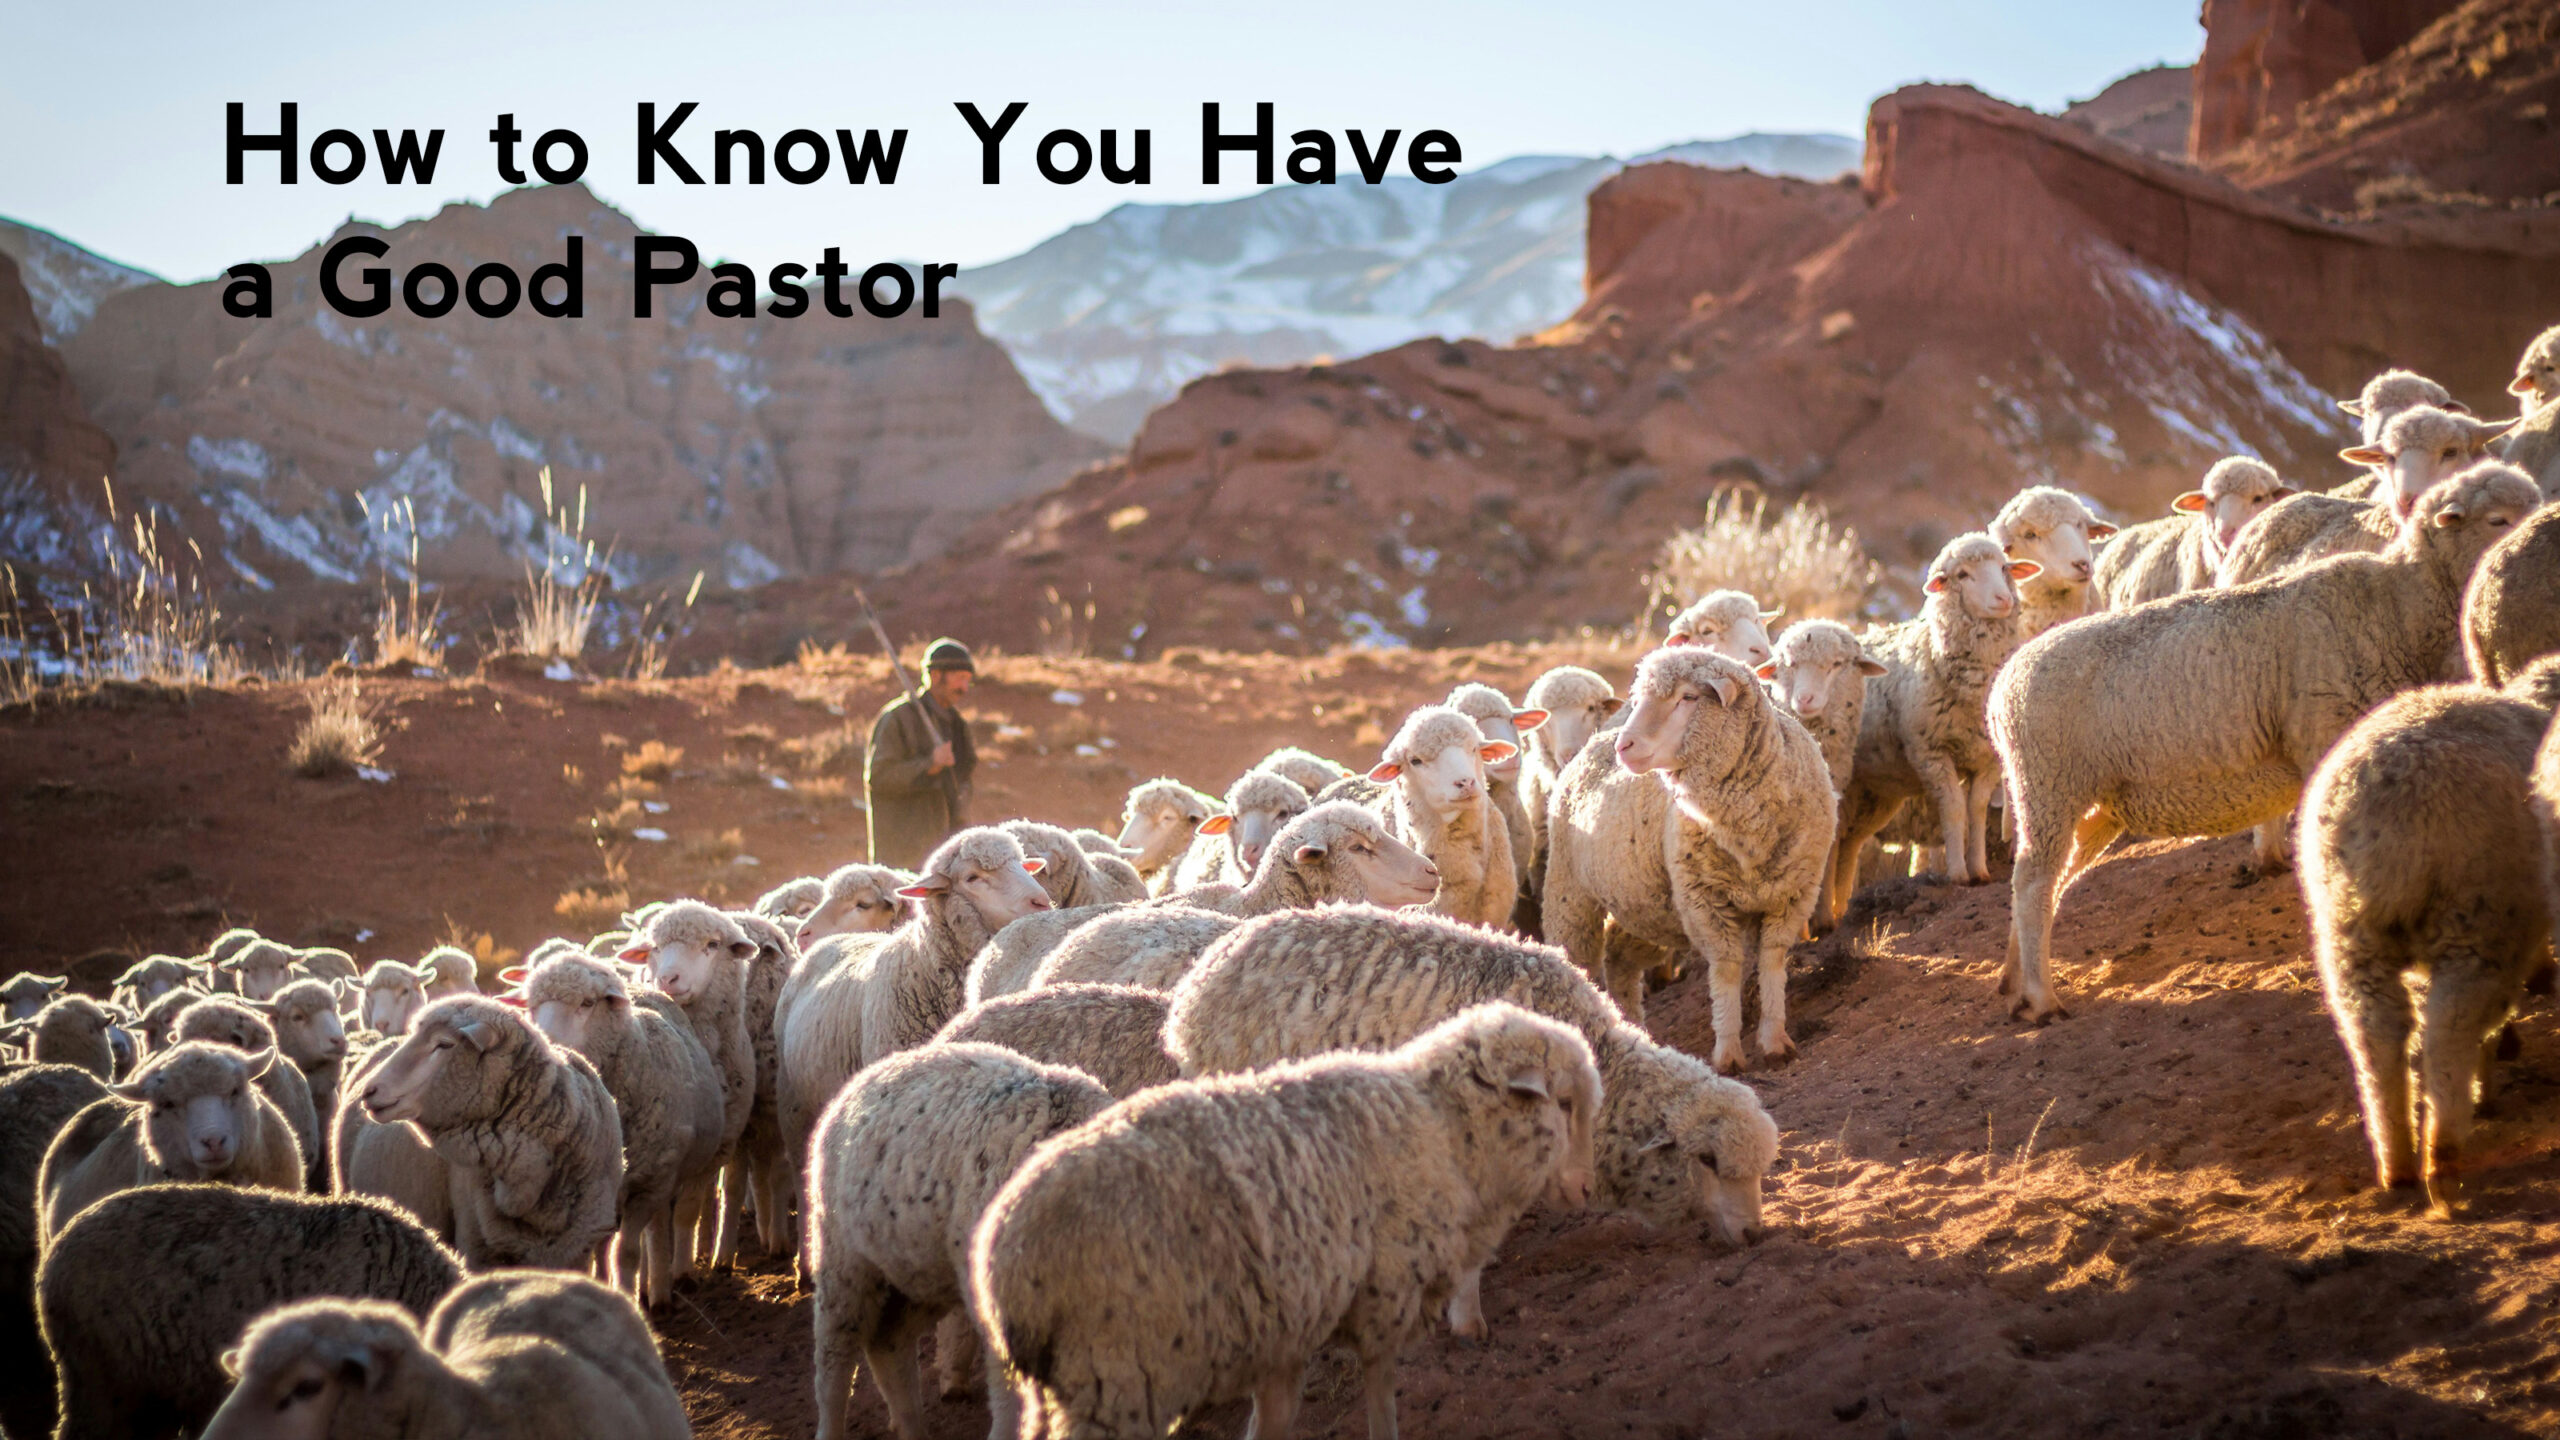 How to Know You Have a Good Pastor